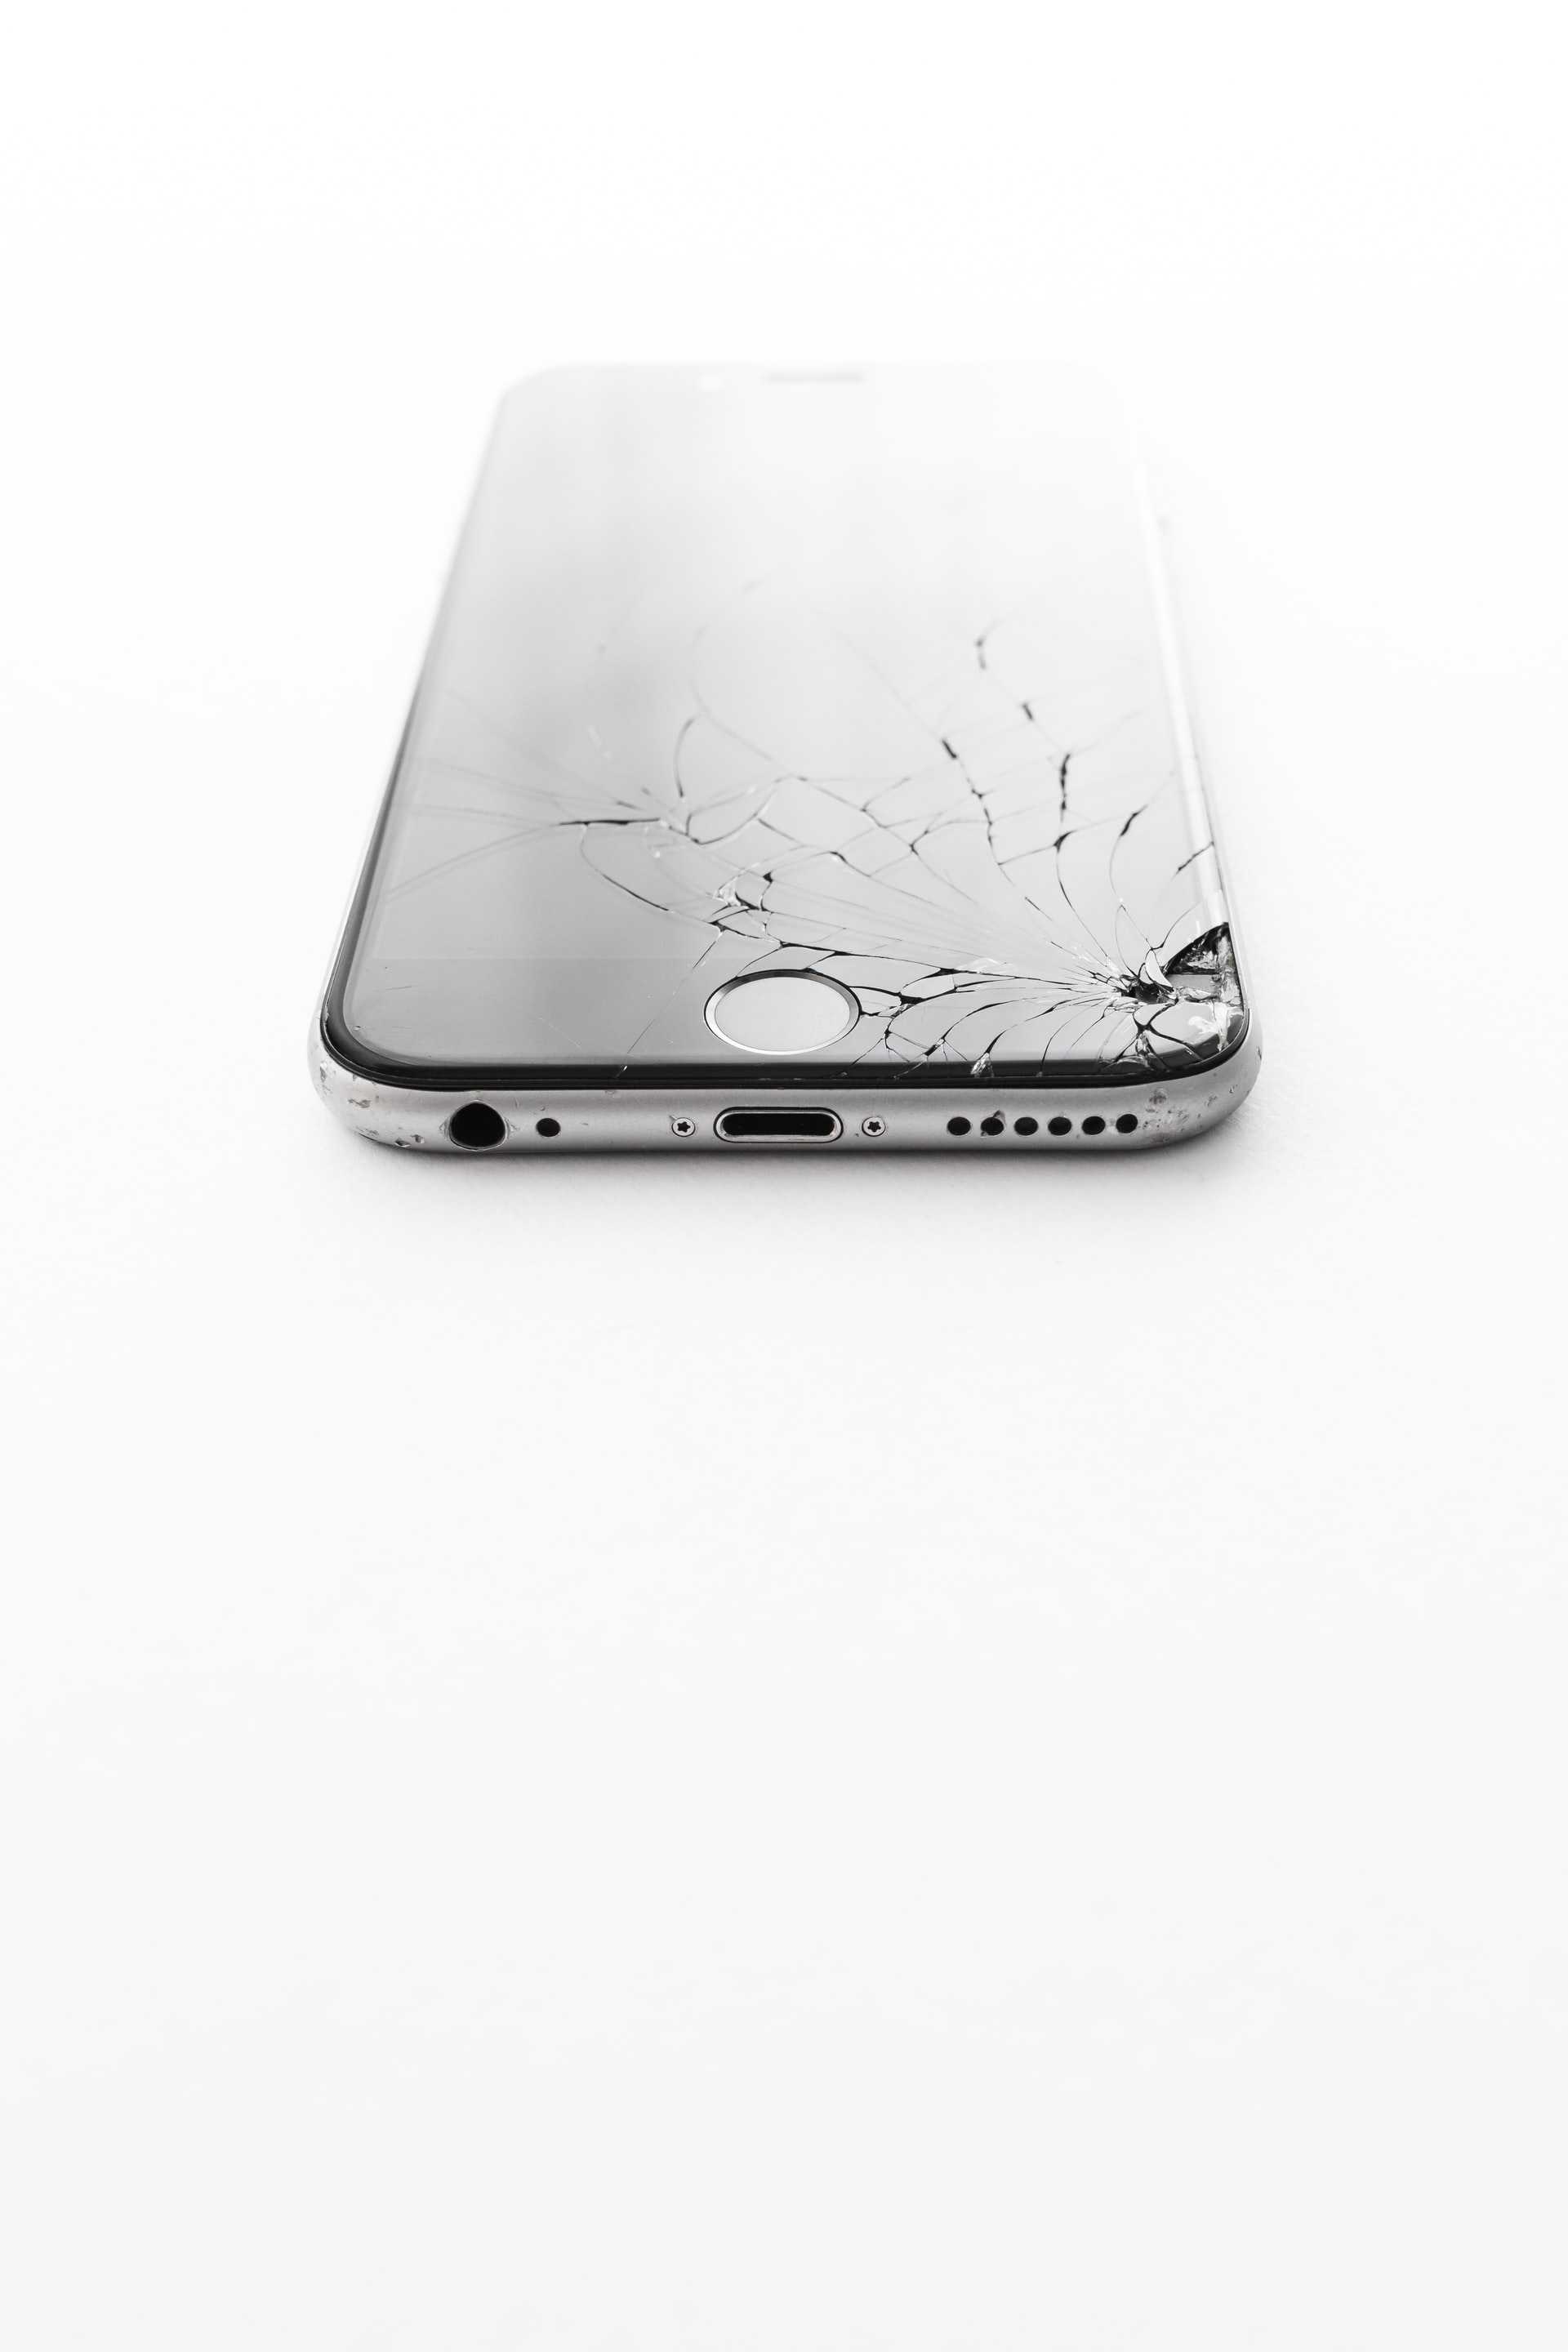 Installing Screen Protector Guide Article Image